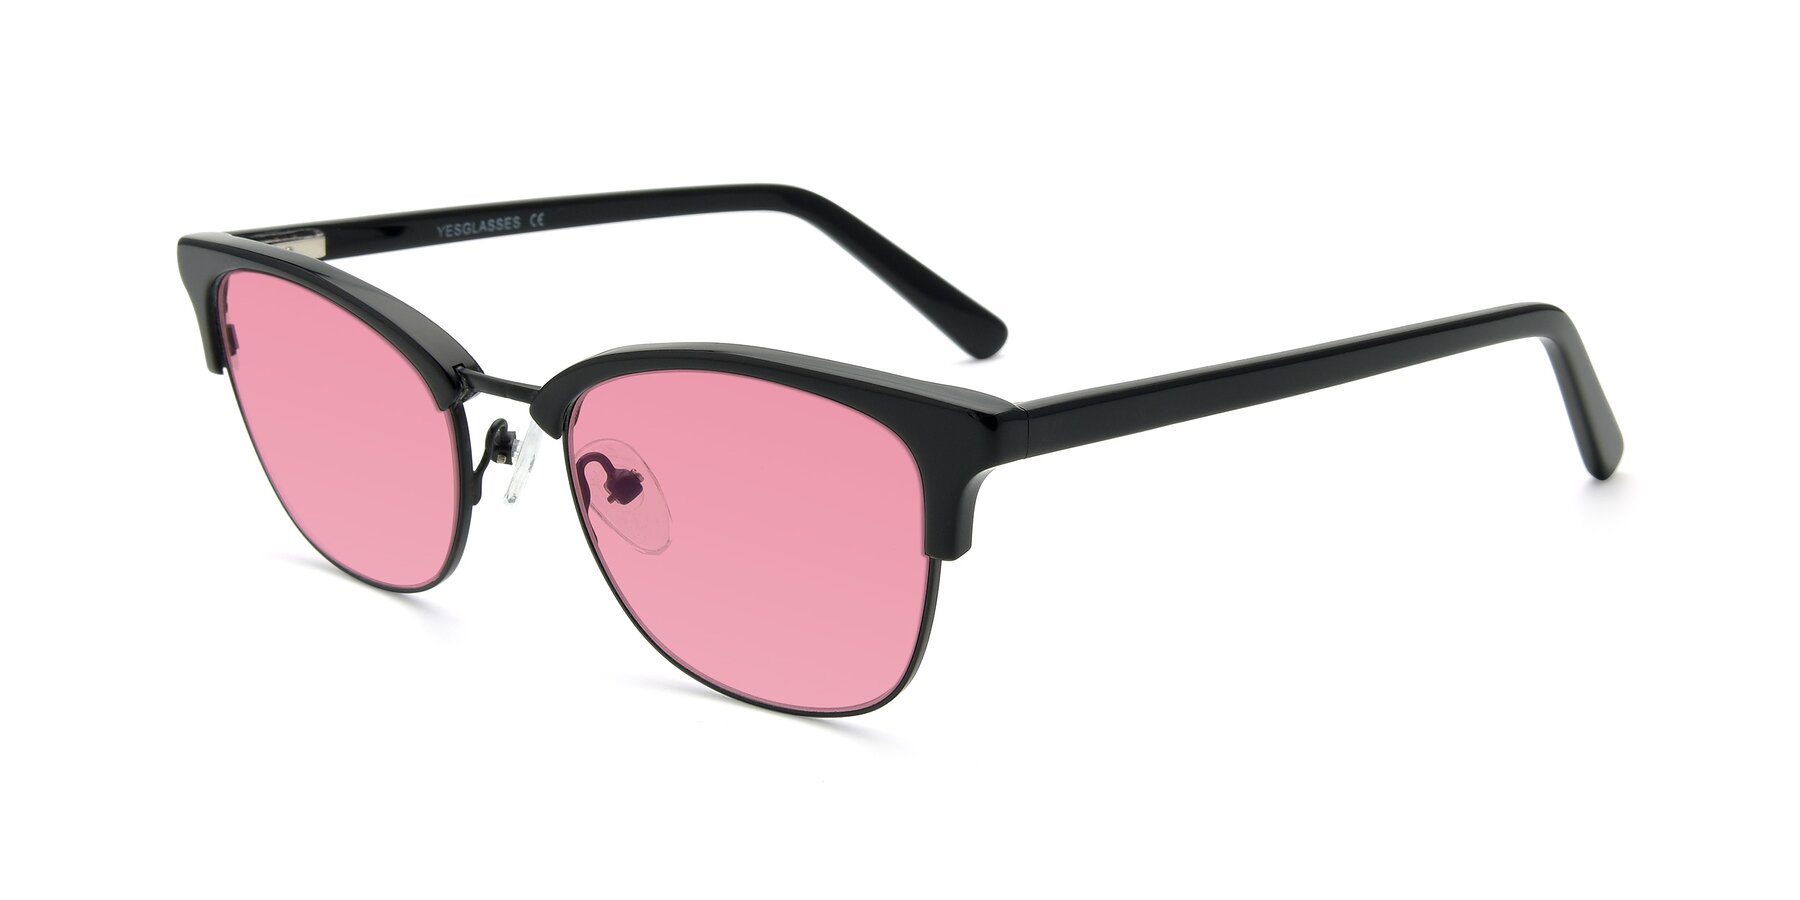 Angle of 17463 in Black with Pink Tinted Lenses